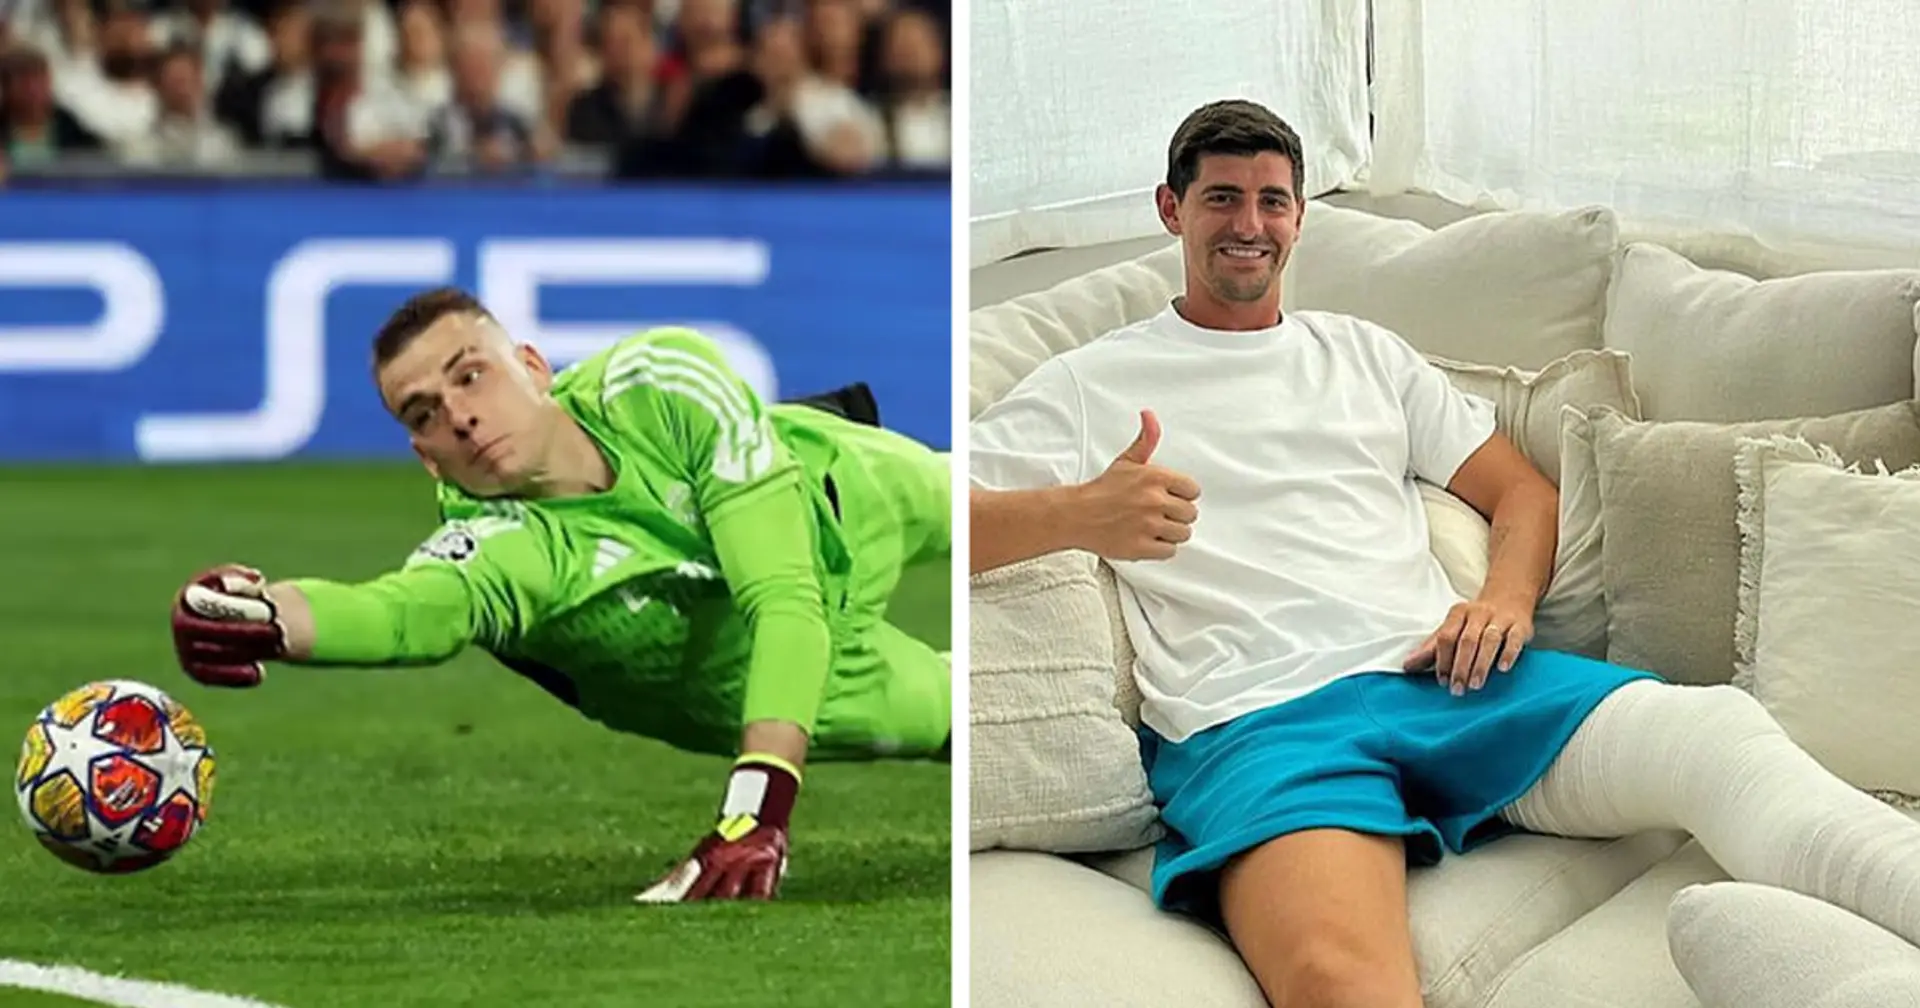 "It's harder than it seems": Thibaut Courtois comments on Andriy Lunin’s mistake in the match against Man City